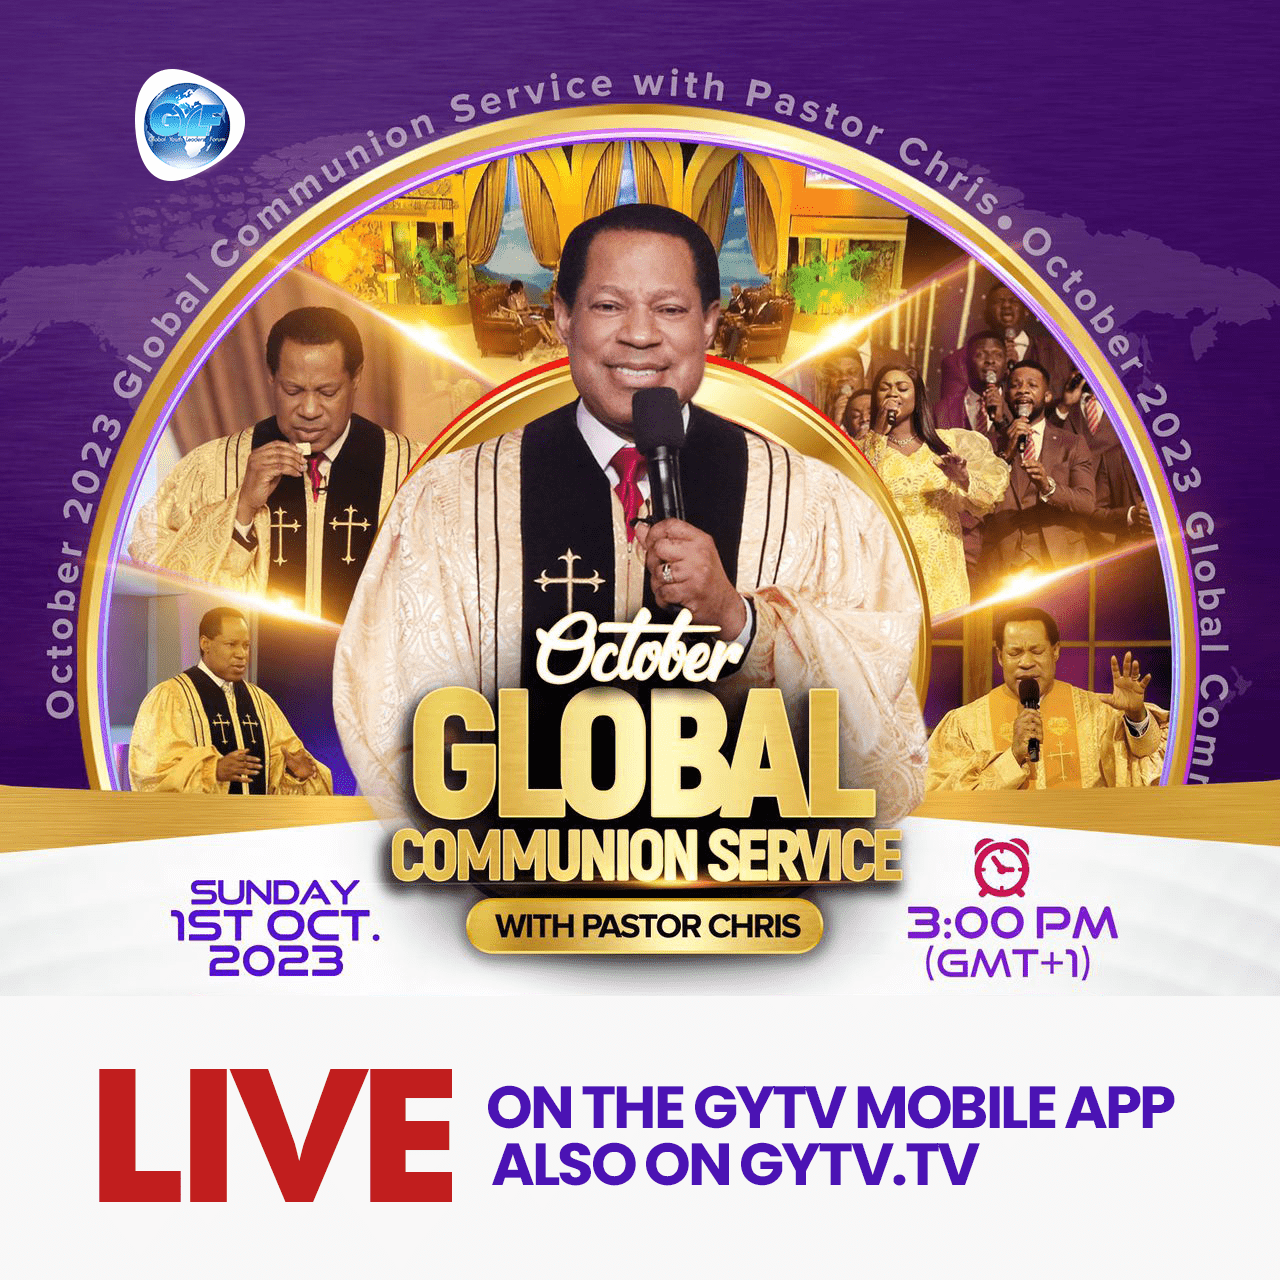 October Global Communion Service with Pastor Chris